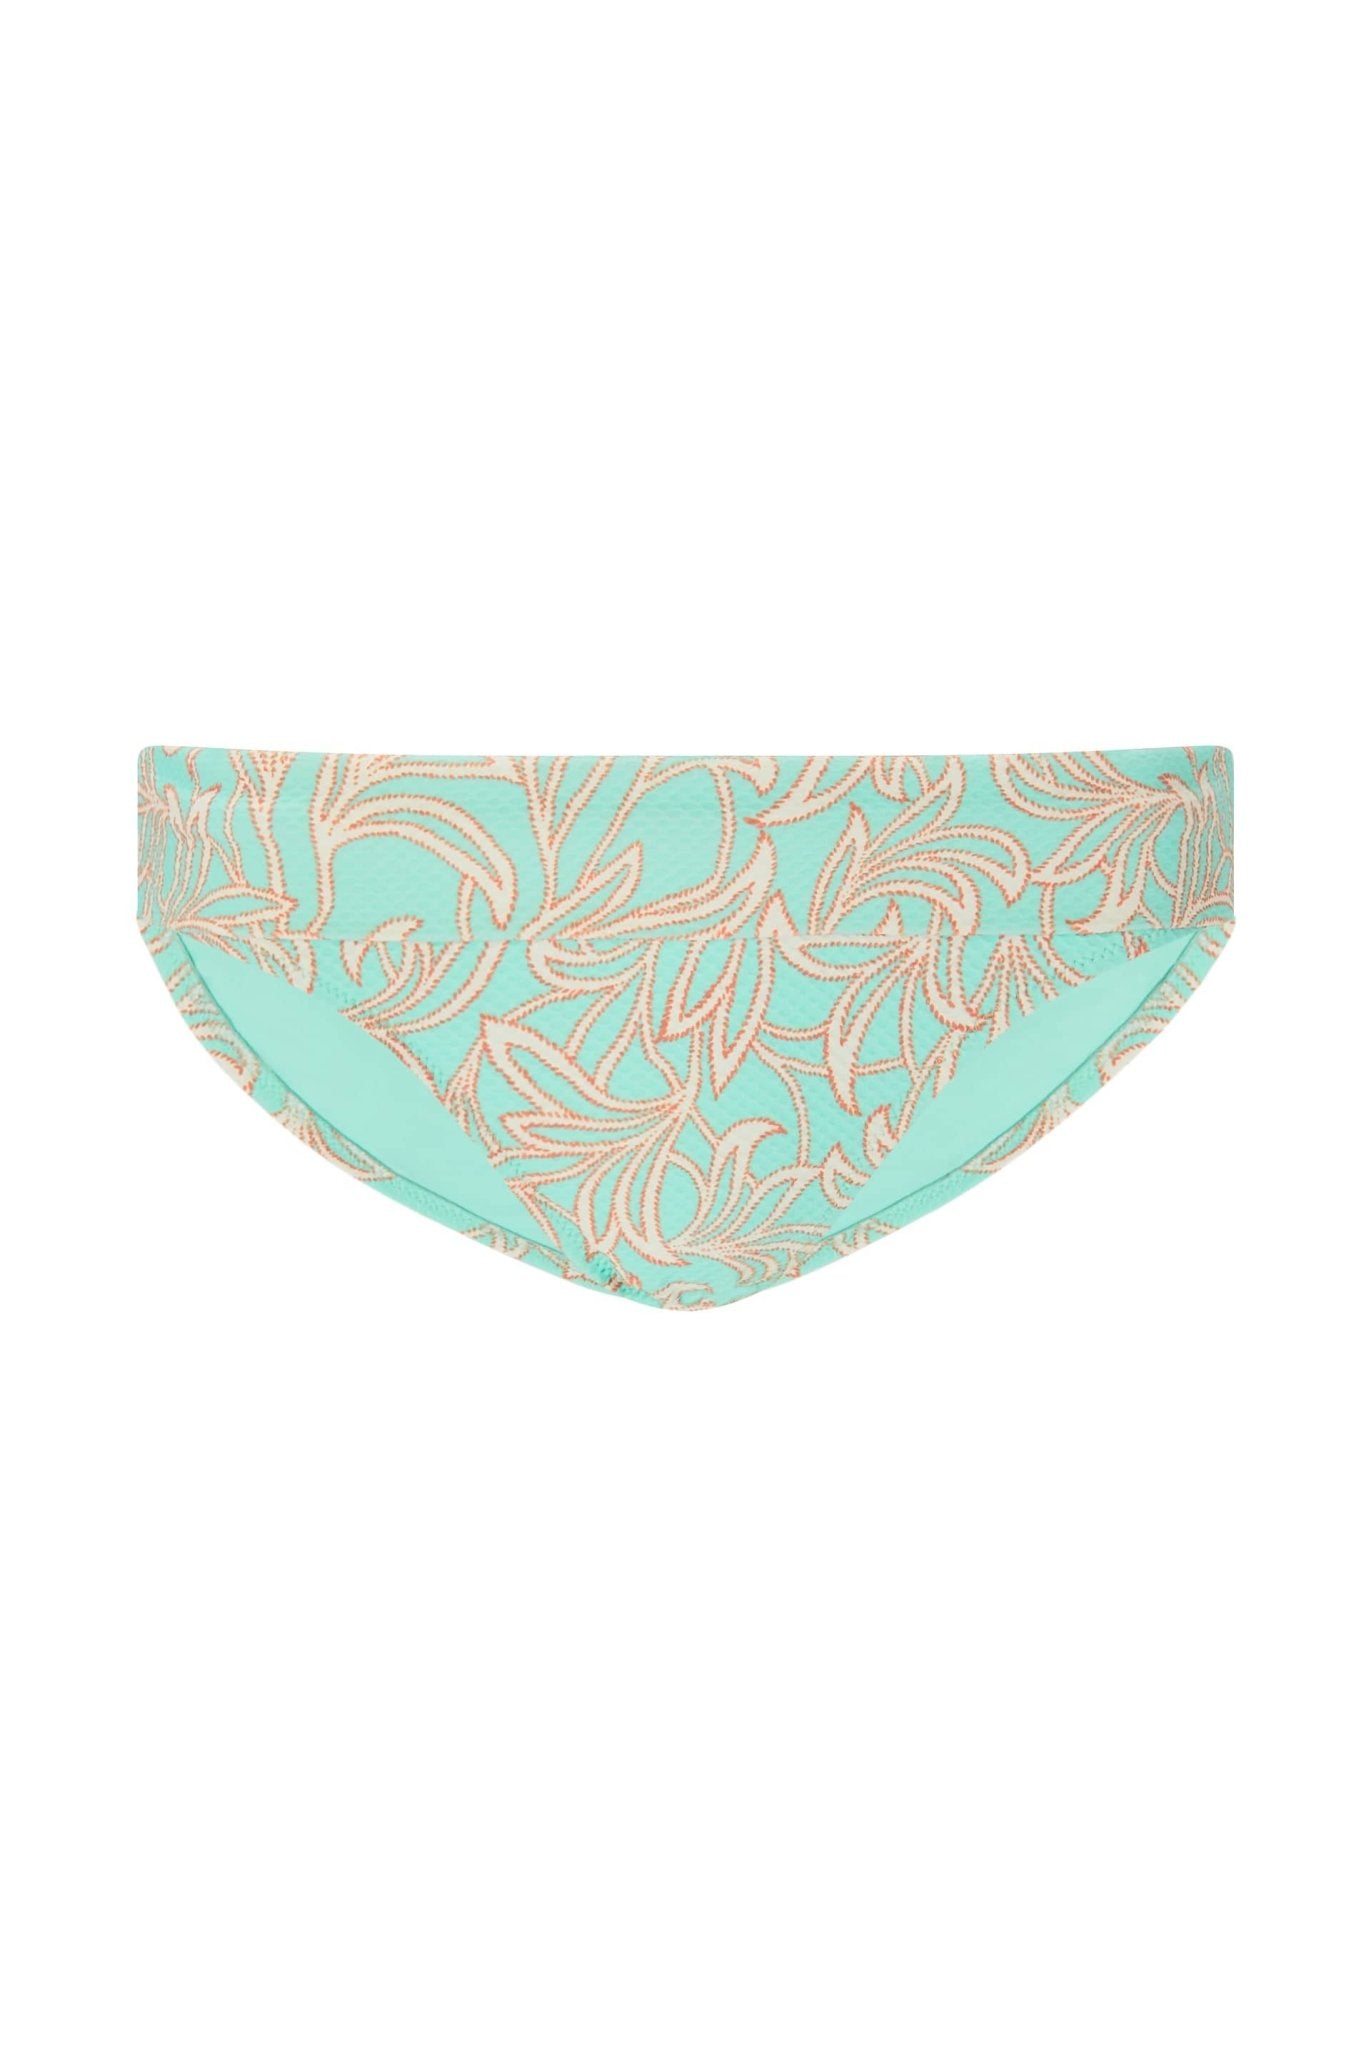 Prickly Pear Fold Over Bottoms - Heidi Klein - UK Store